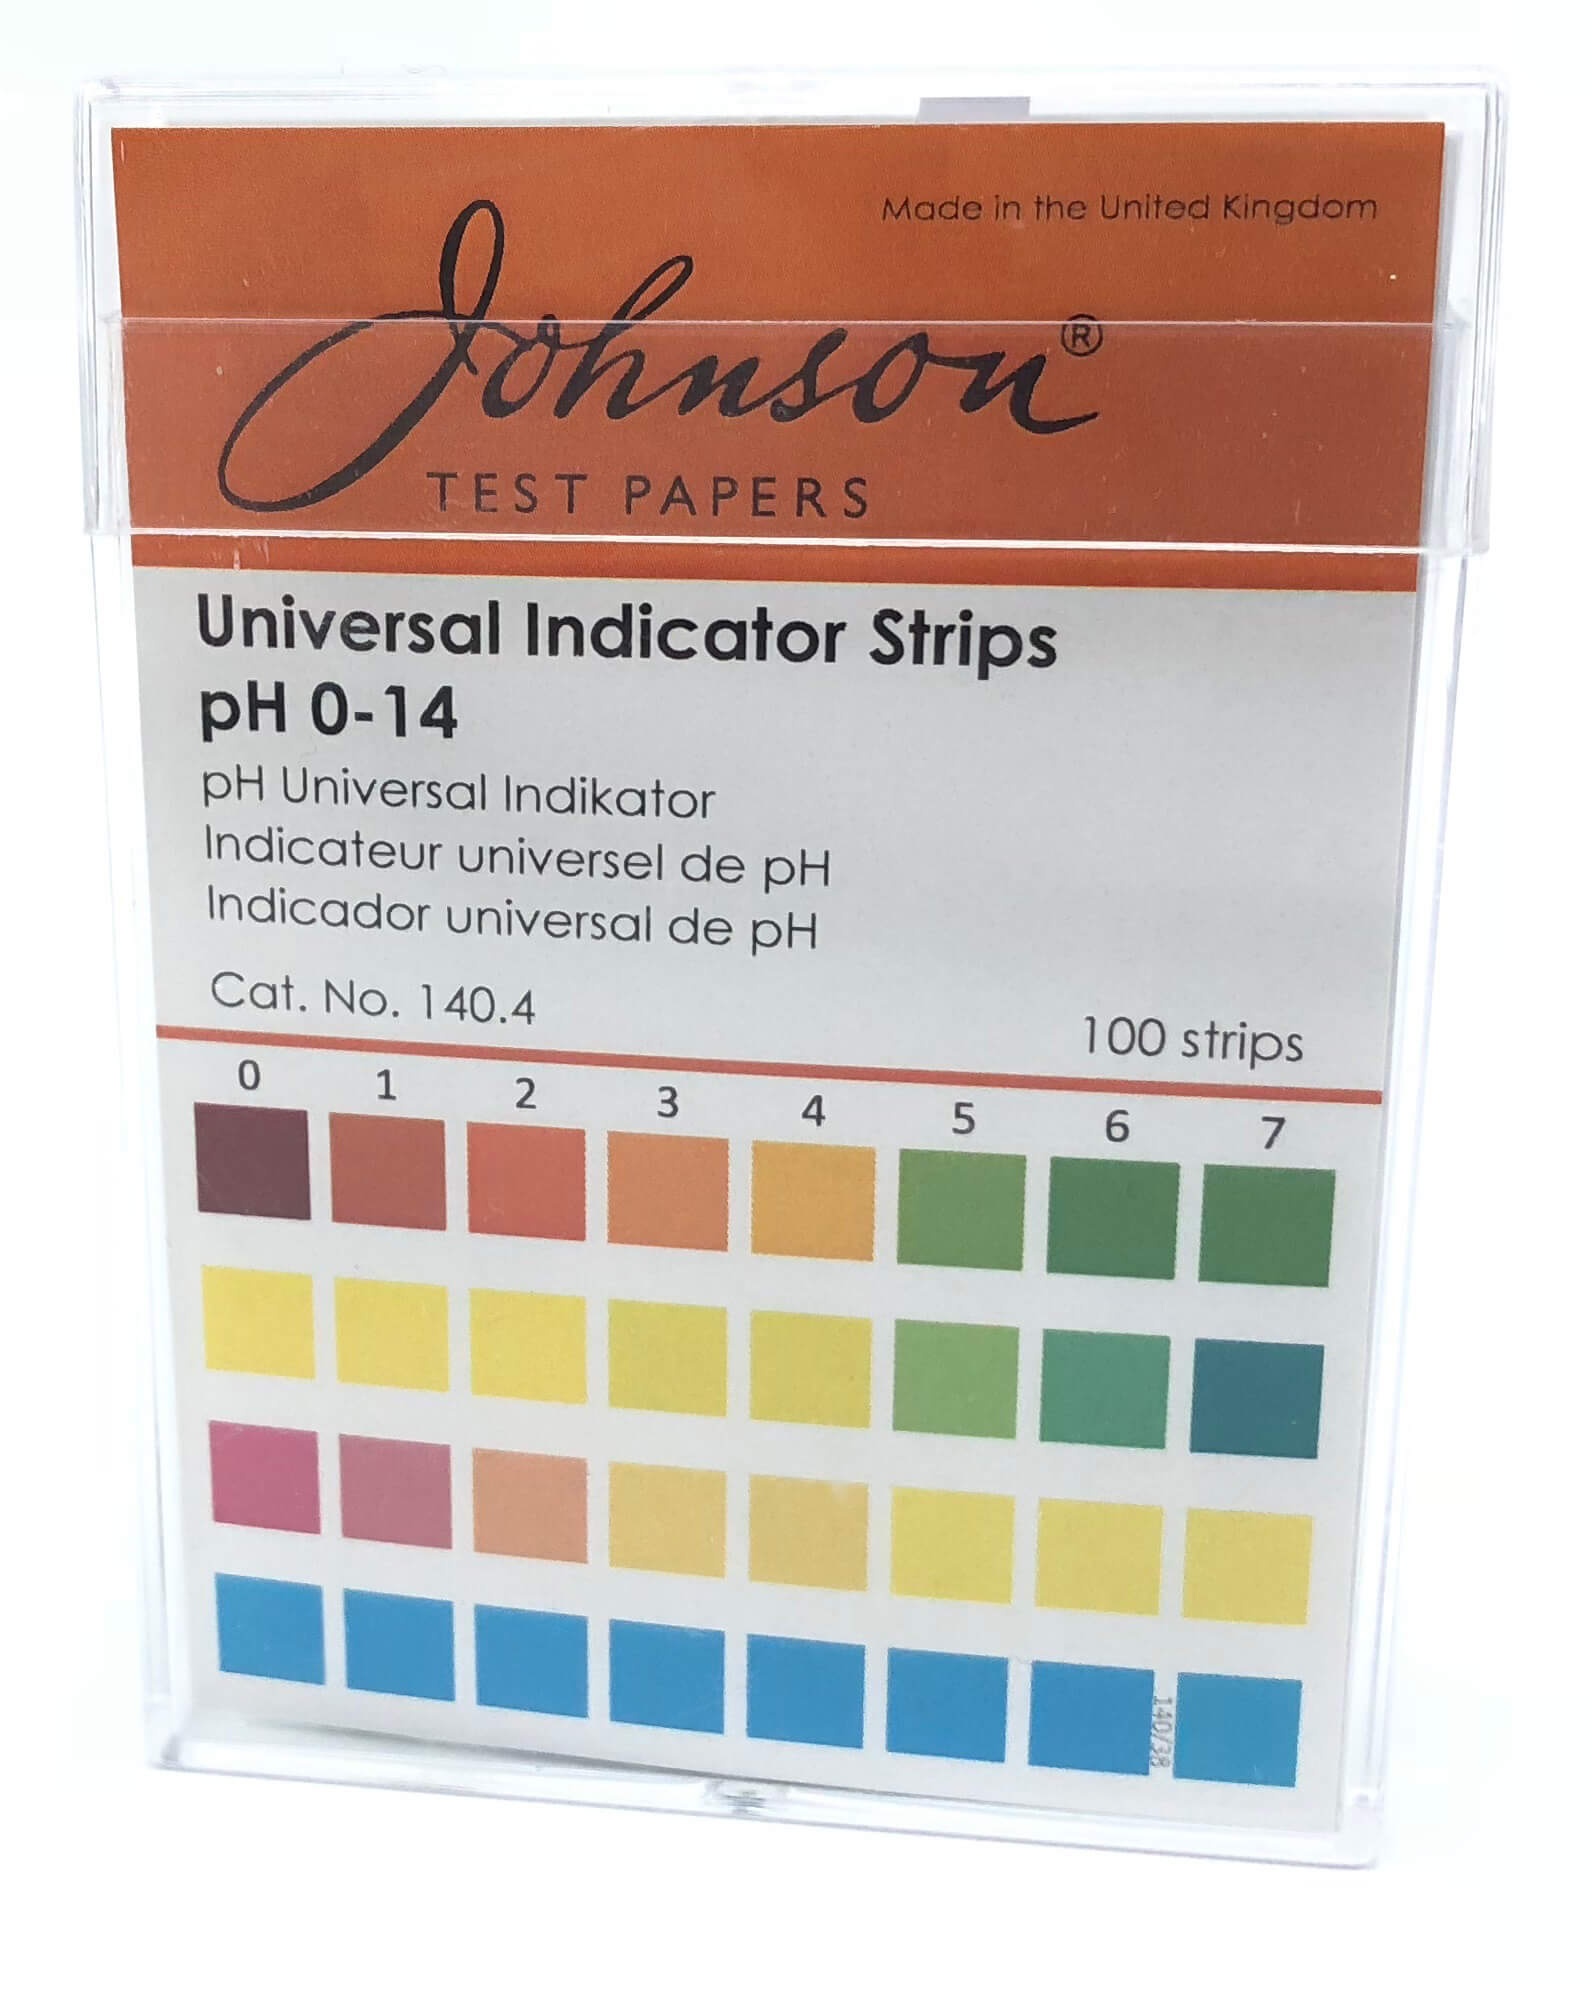 Non-bleed pH Strips | Johnson Test Papers